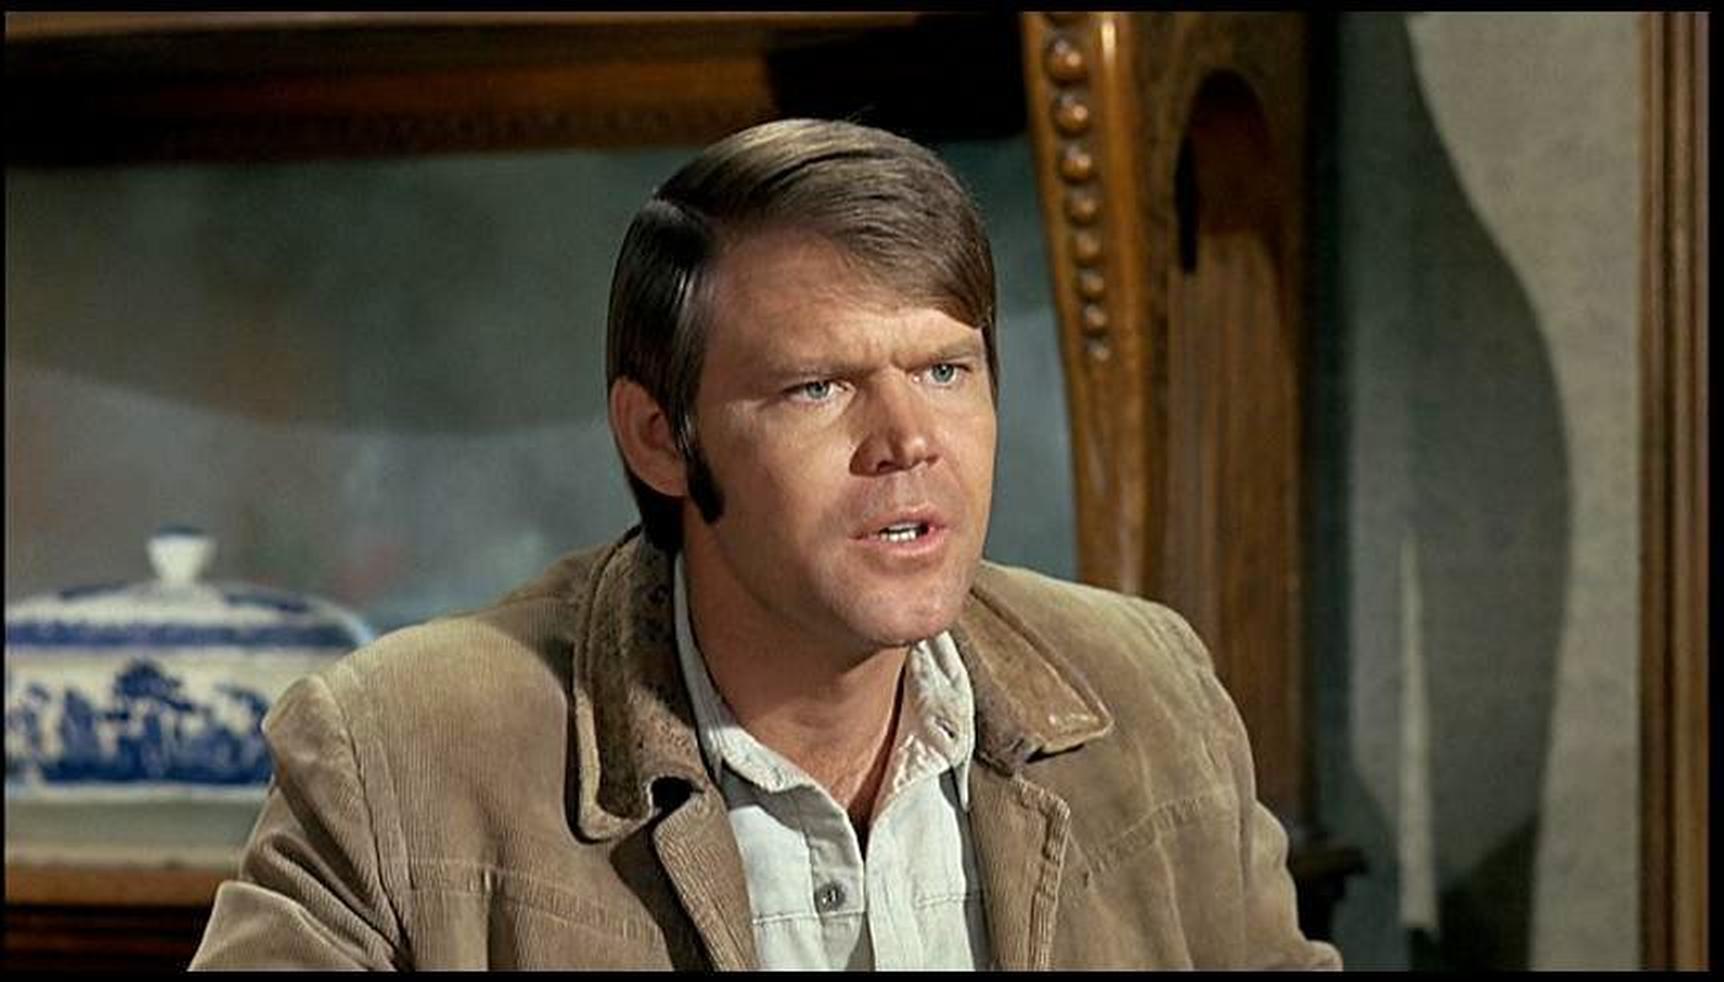 Happy Trails to Glen Campbell (1936 – 2017) - Cowboys and Indians Magazine